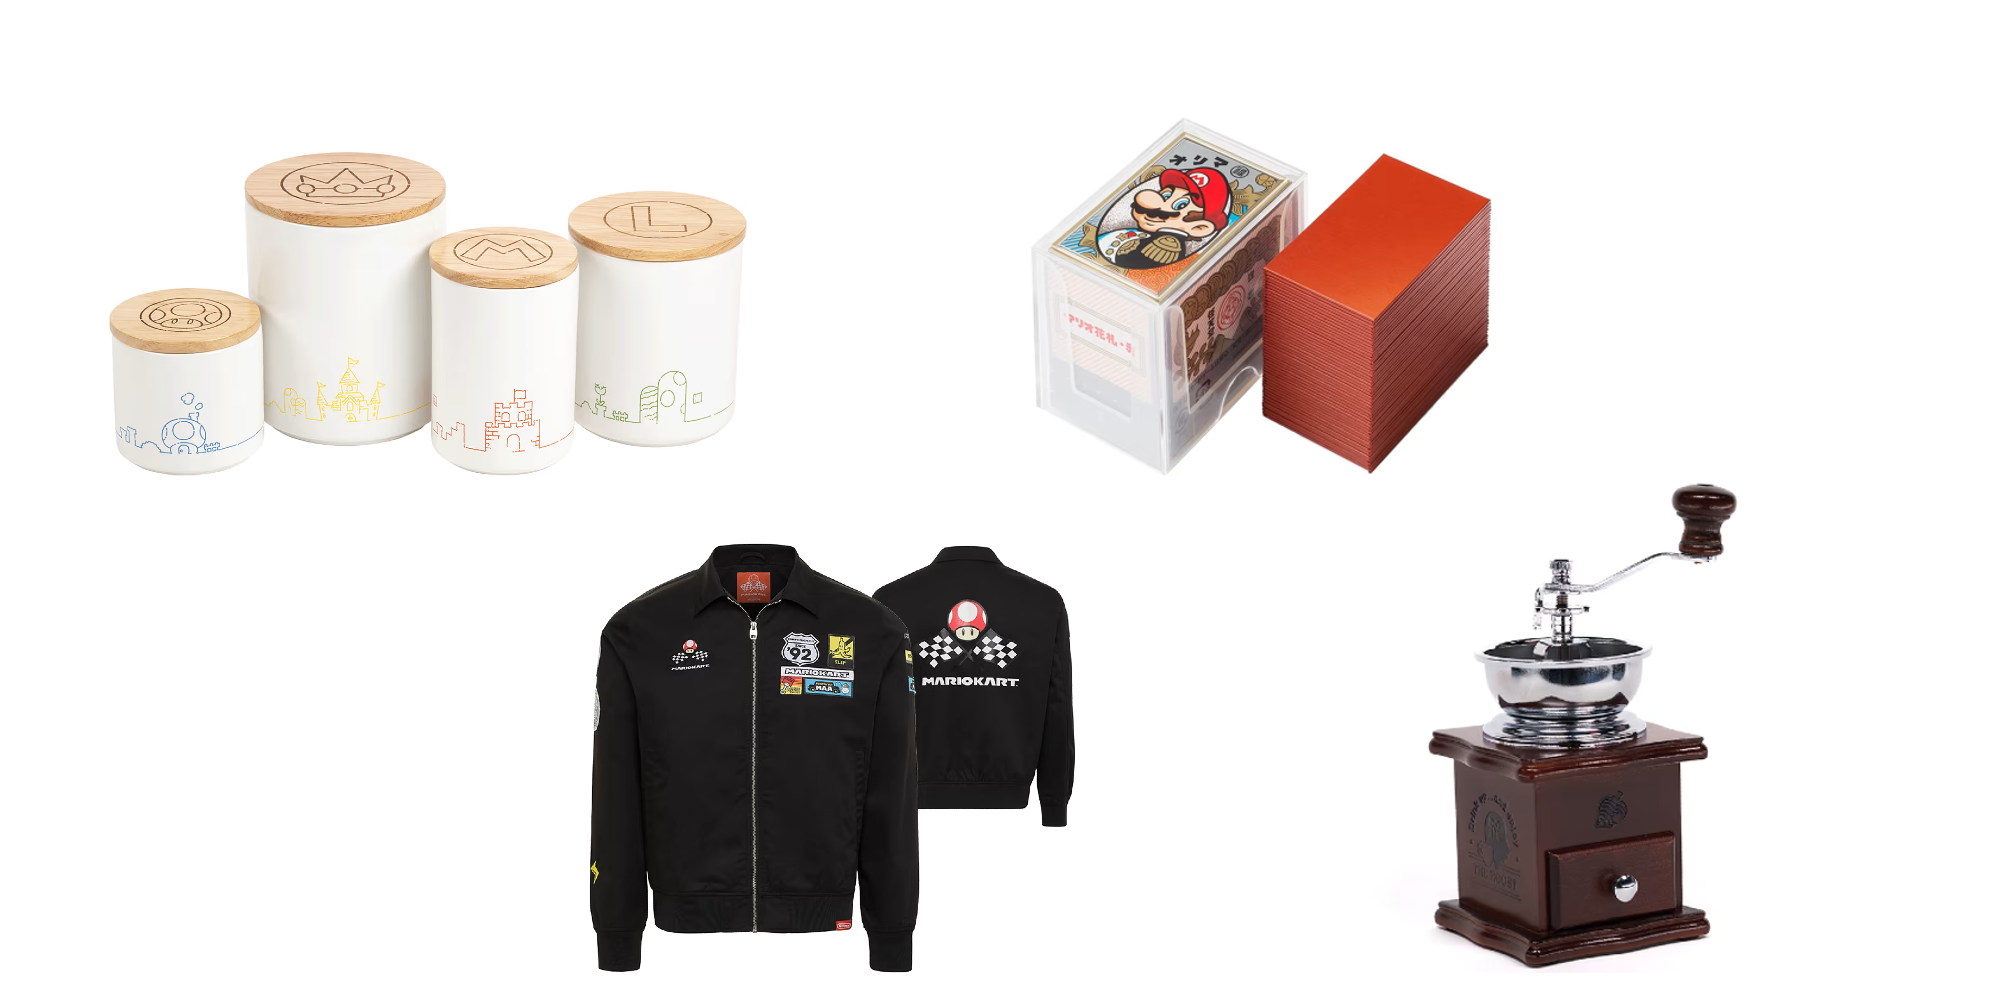 Header image for Best Nintendo Merch, with images of flight jacket, Mario ceramic containers, Hanafuda cards, and coffee grinder